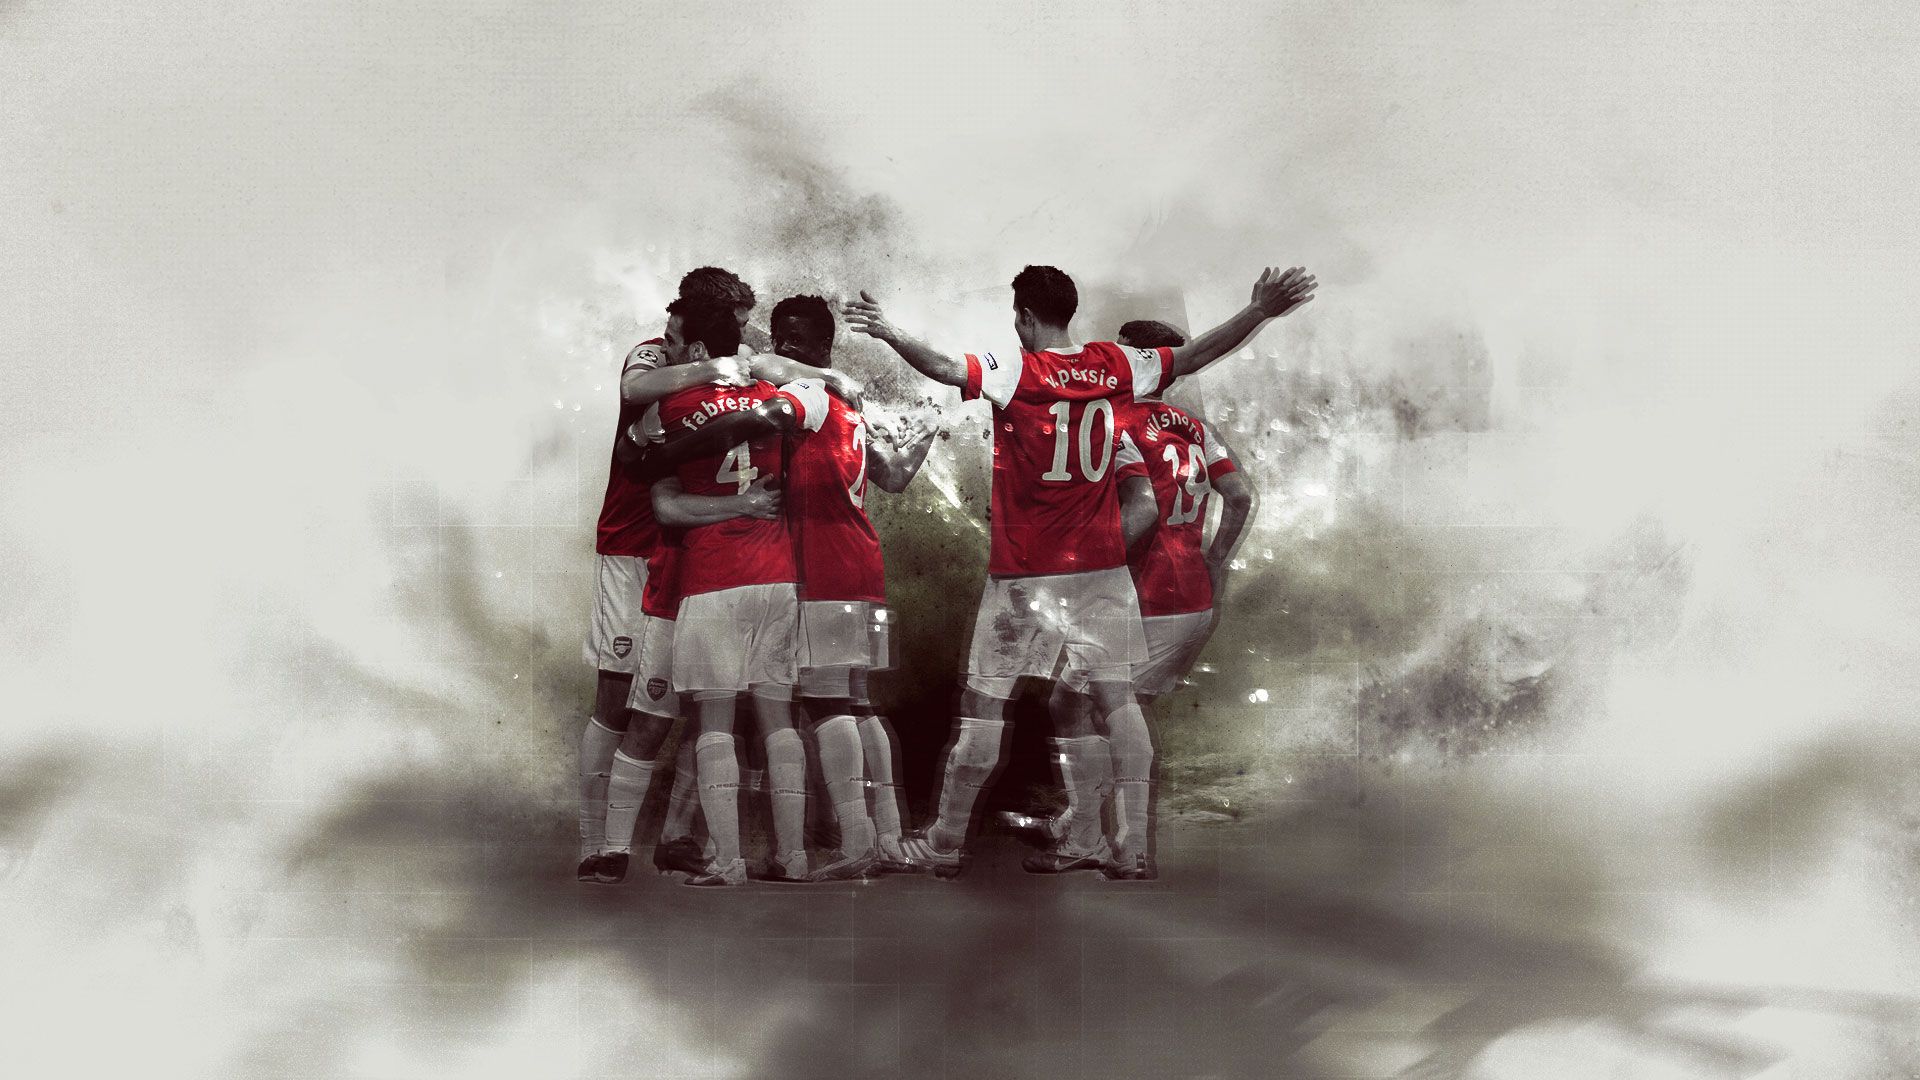 Arsenal FC Wallpapers